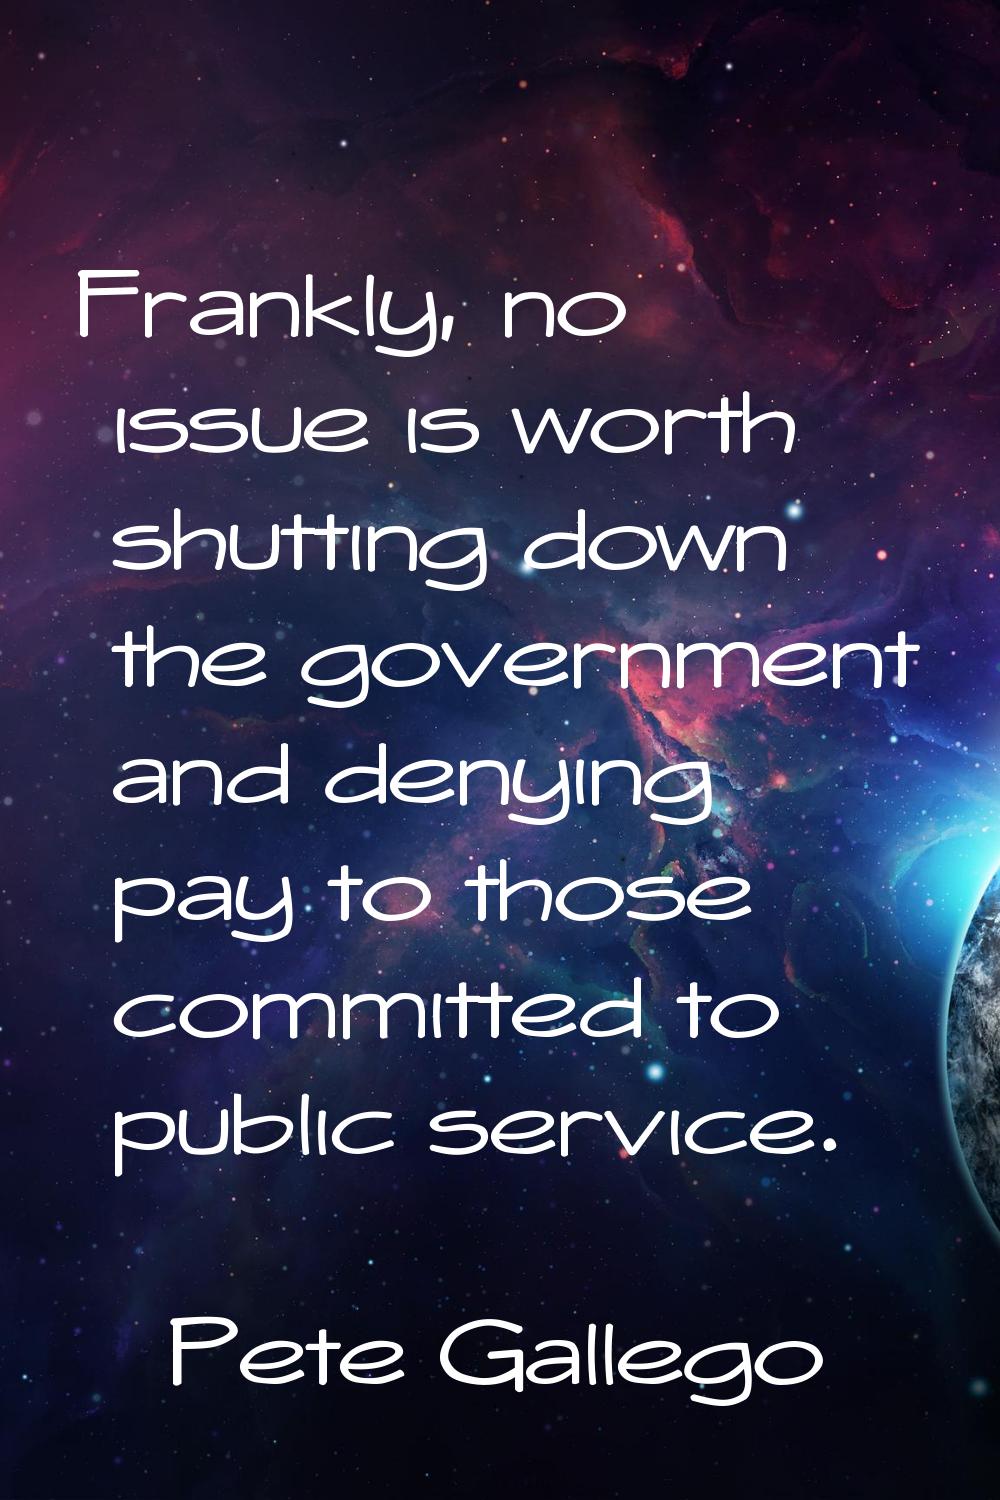 Frankly, no issue is worth shutting down the government and denying pay to those committed to publi